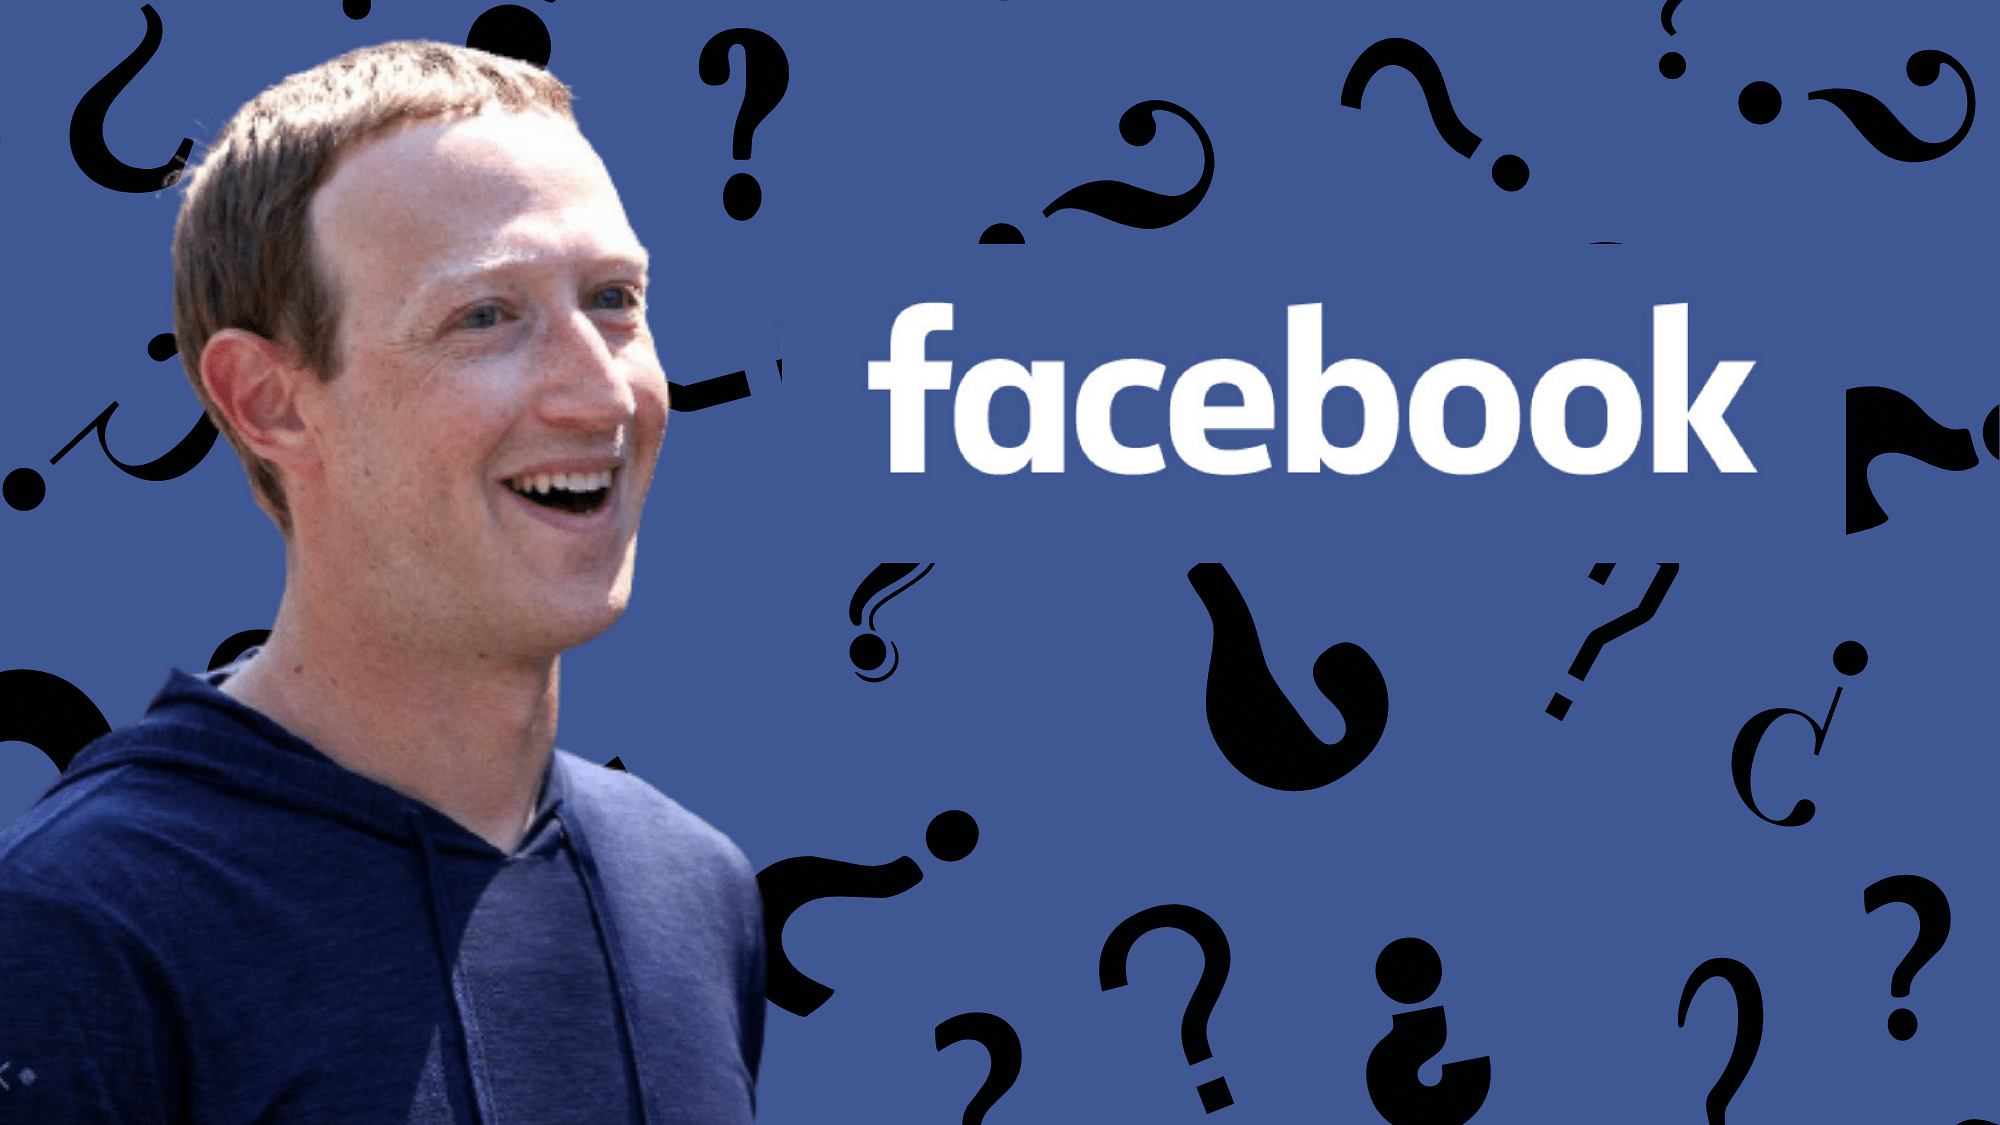 <div class="paragraphs"><p>Mark Zuckerberg recently <ins><a href="https://www.theverge.com/22588022/mark-zuckerberg-facebook-ceo-metaverse-interview">announced</a></ins> the tech giant will shift from being a social media company to becoming “a metaverse company”</p></div>